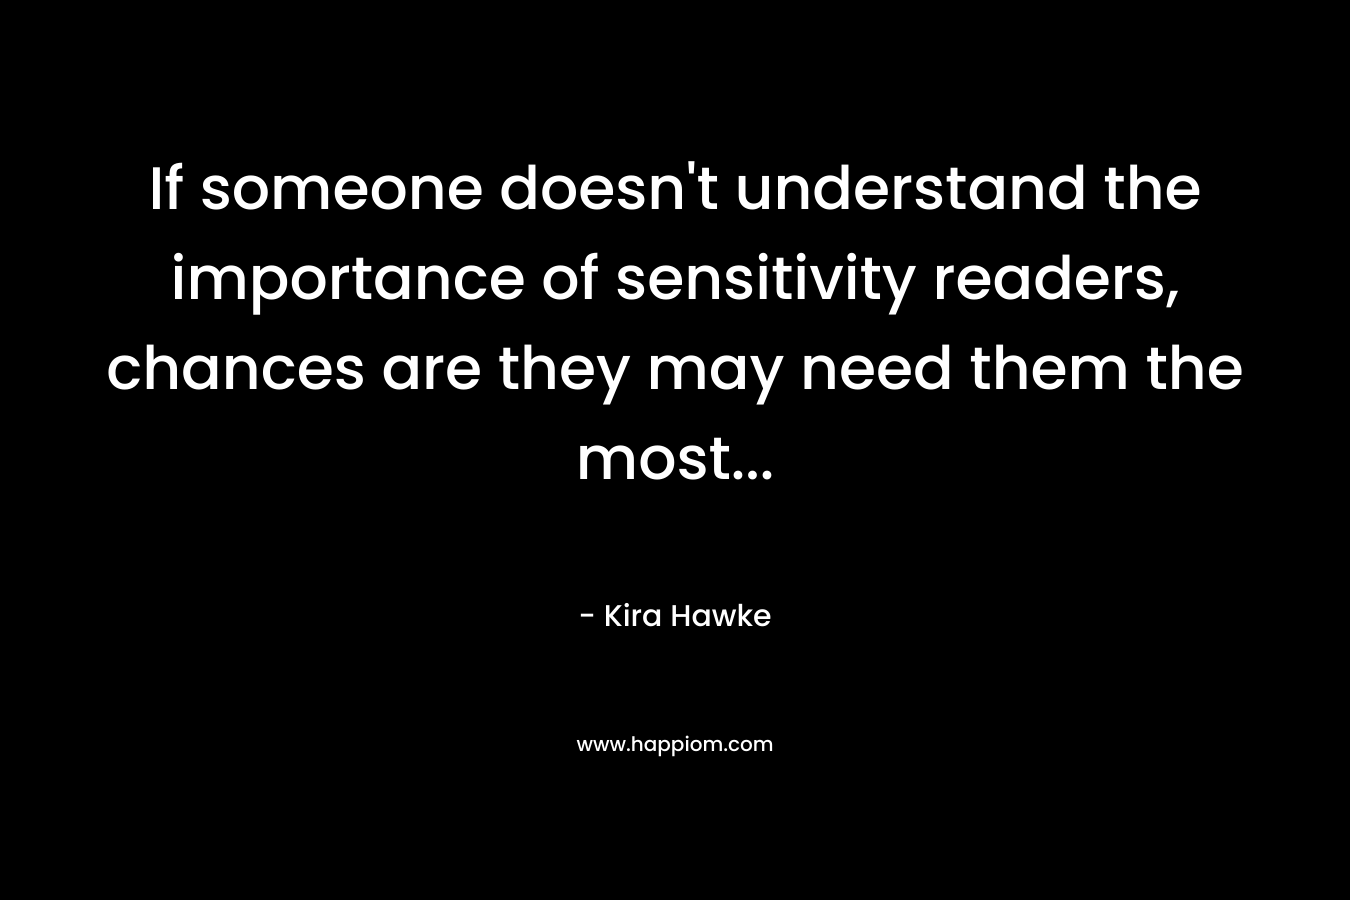 If someone doesn't understand the importance of sensitivity readers, chances are they may need them the most...